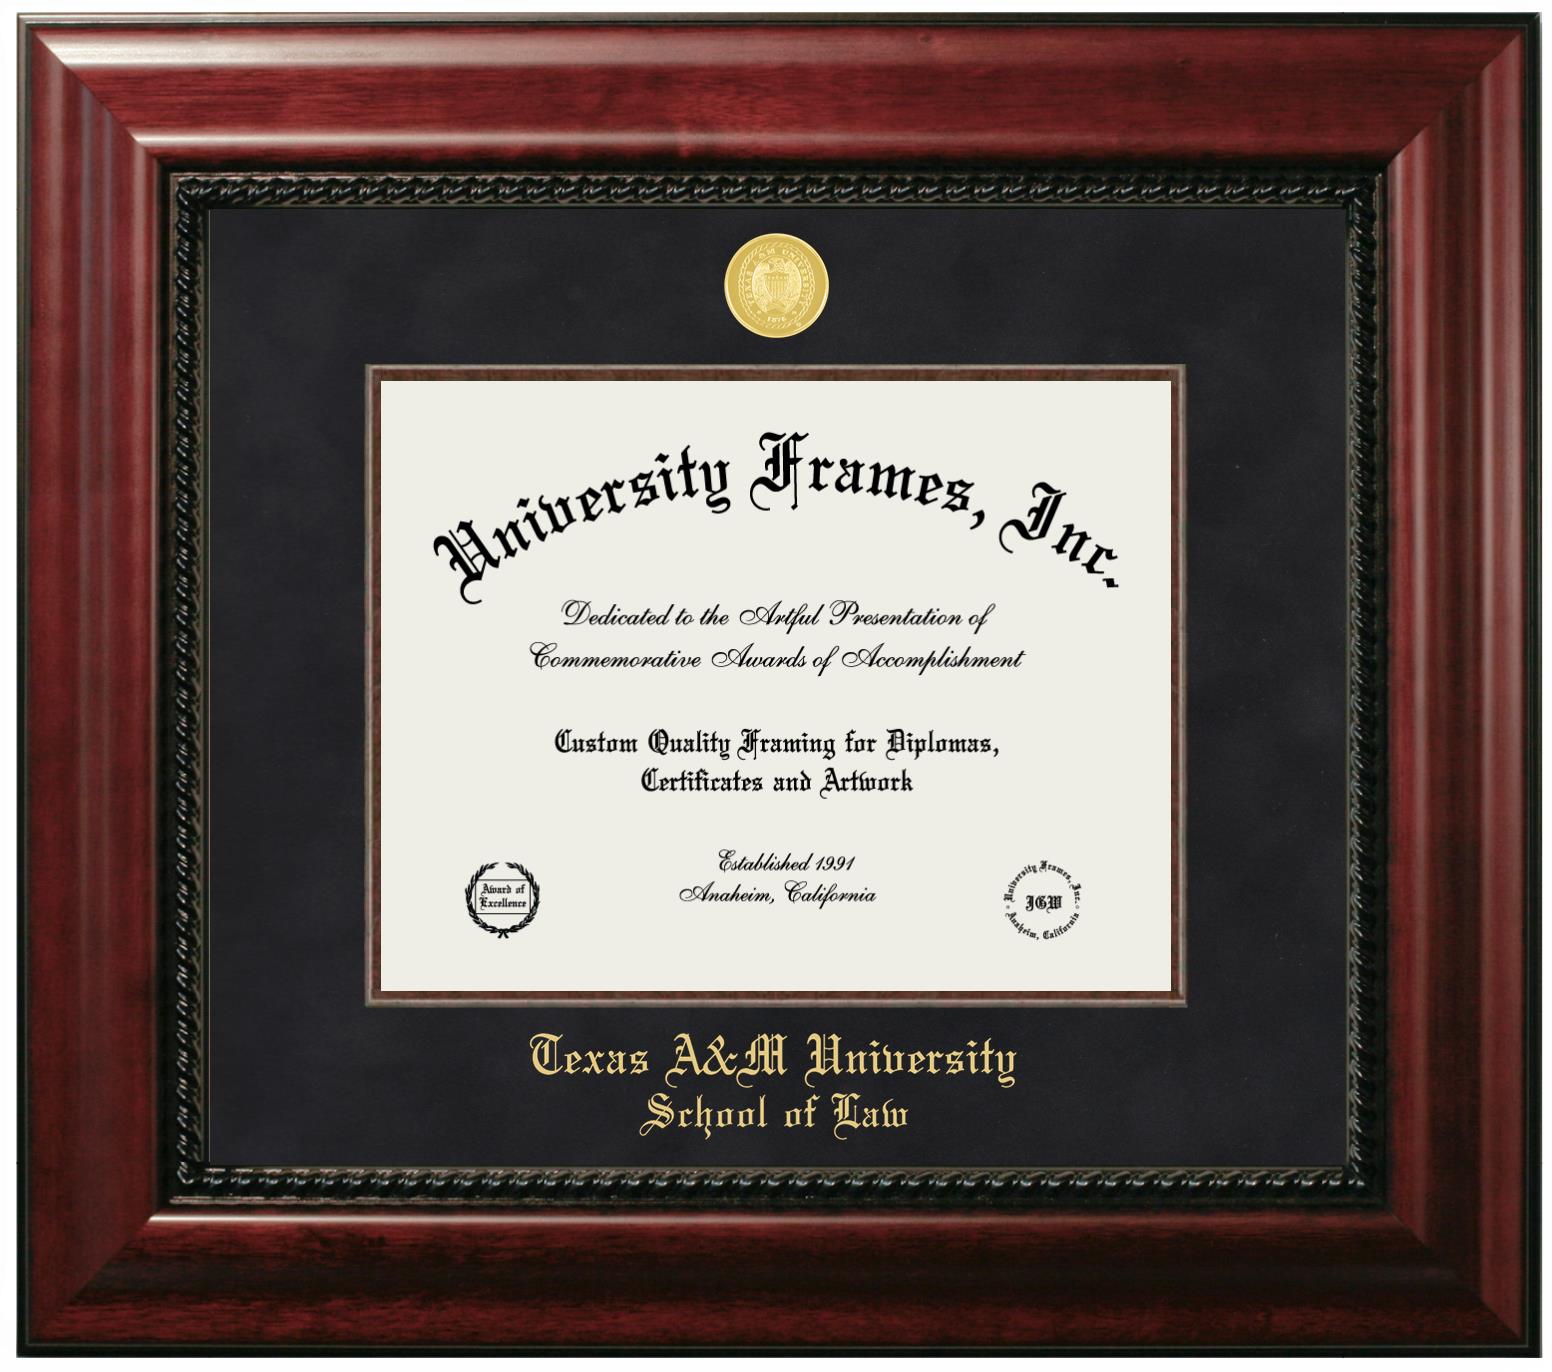 Texas A&M University School of Law Diploma Frame in Executive with